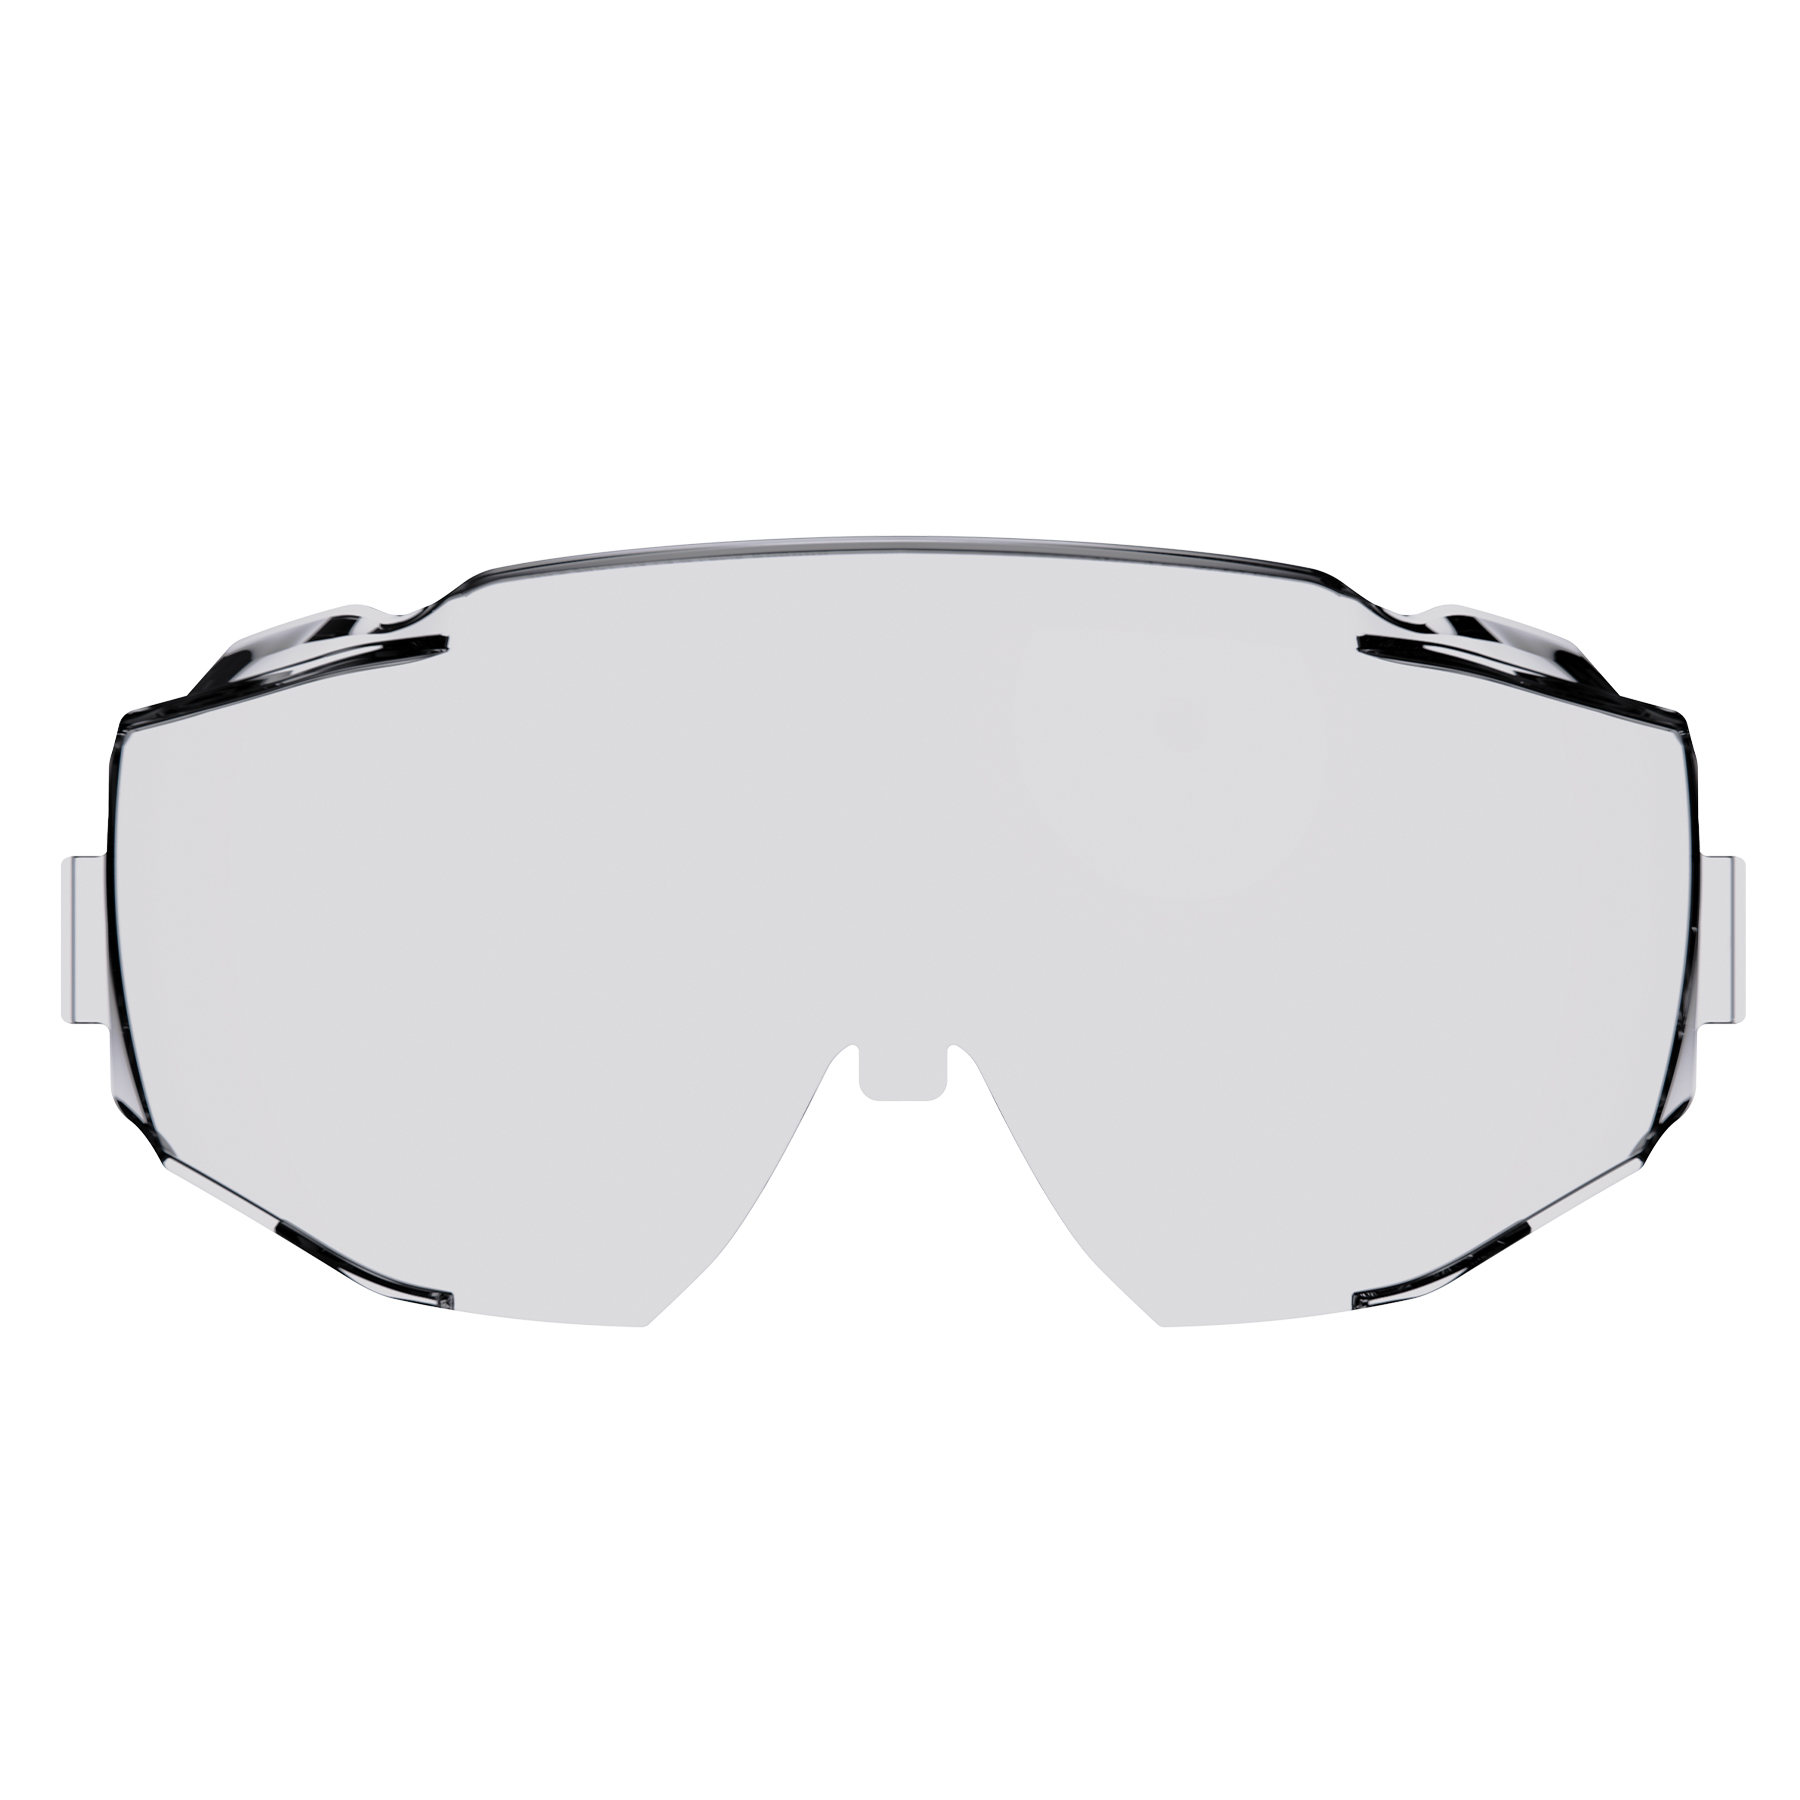 Generic (non OEM) replacement Visor & Headband headset with No Lens for  OptiVISOR® Compare to DA-0 headset without Lensplate Ideal replacement part  for someone who has lenses and just needs a replacement